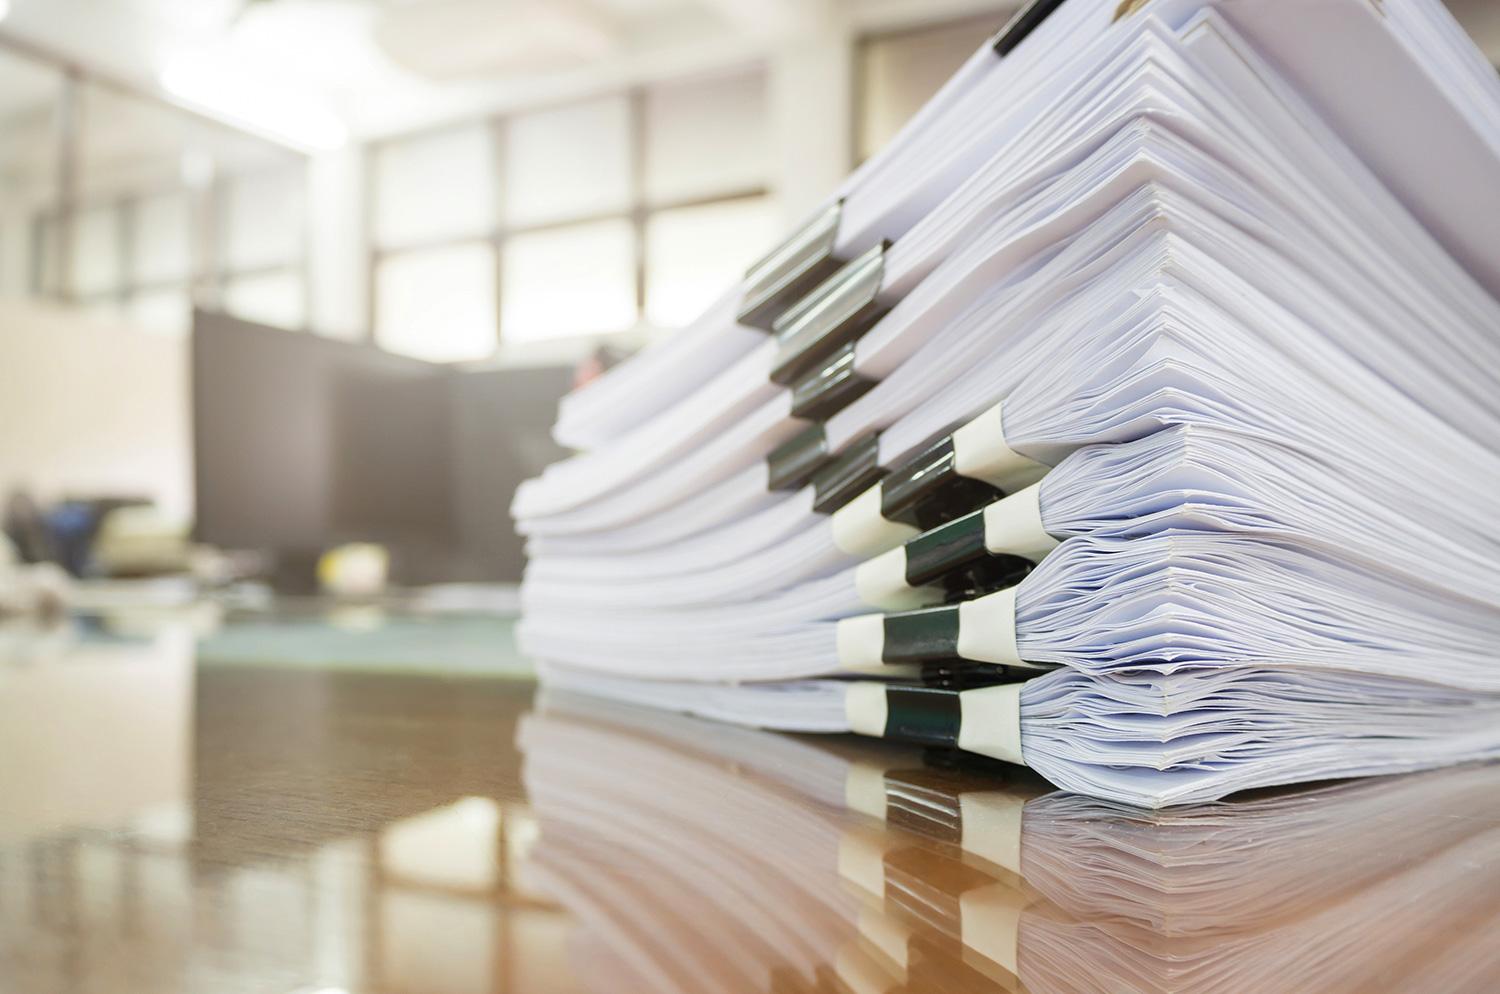 A stack of business documents on a desk